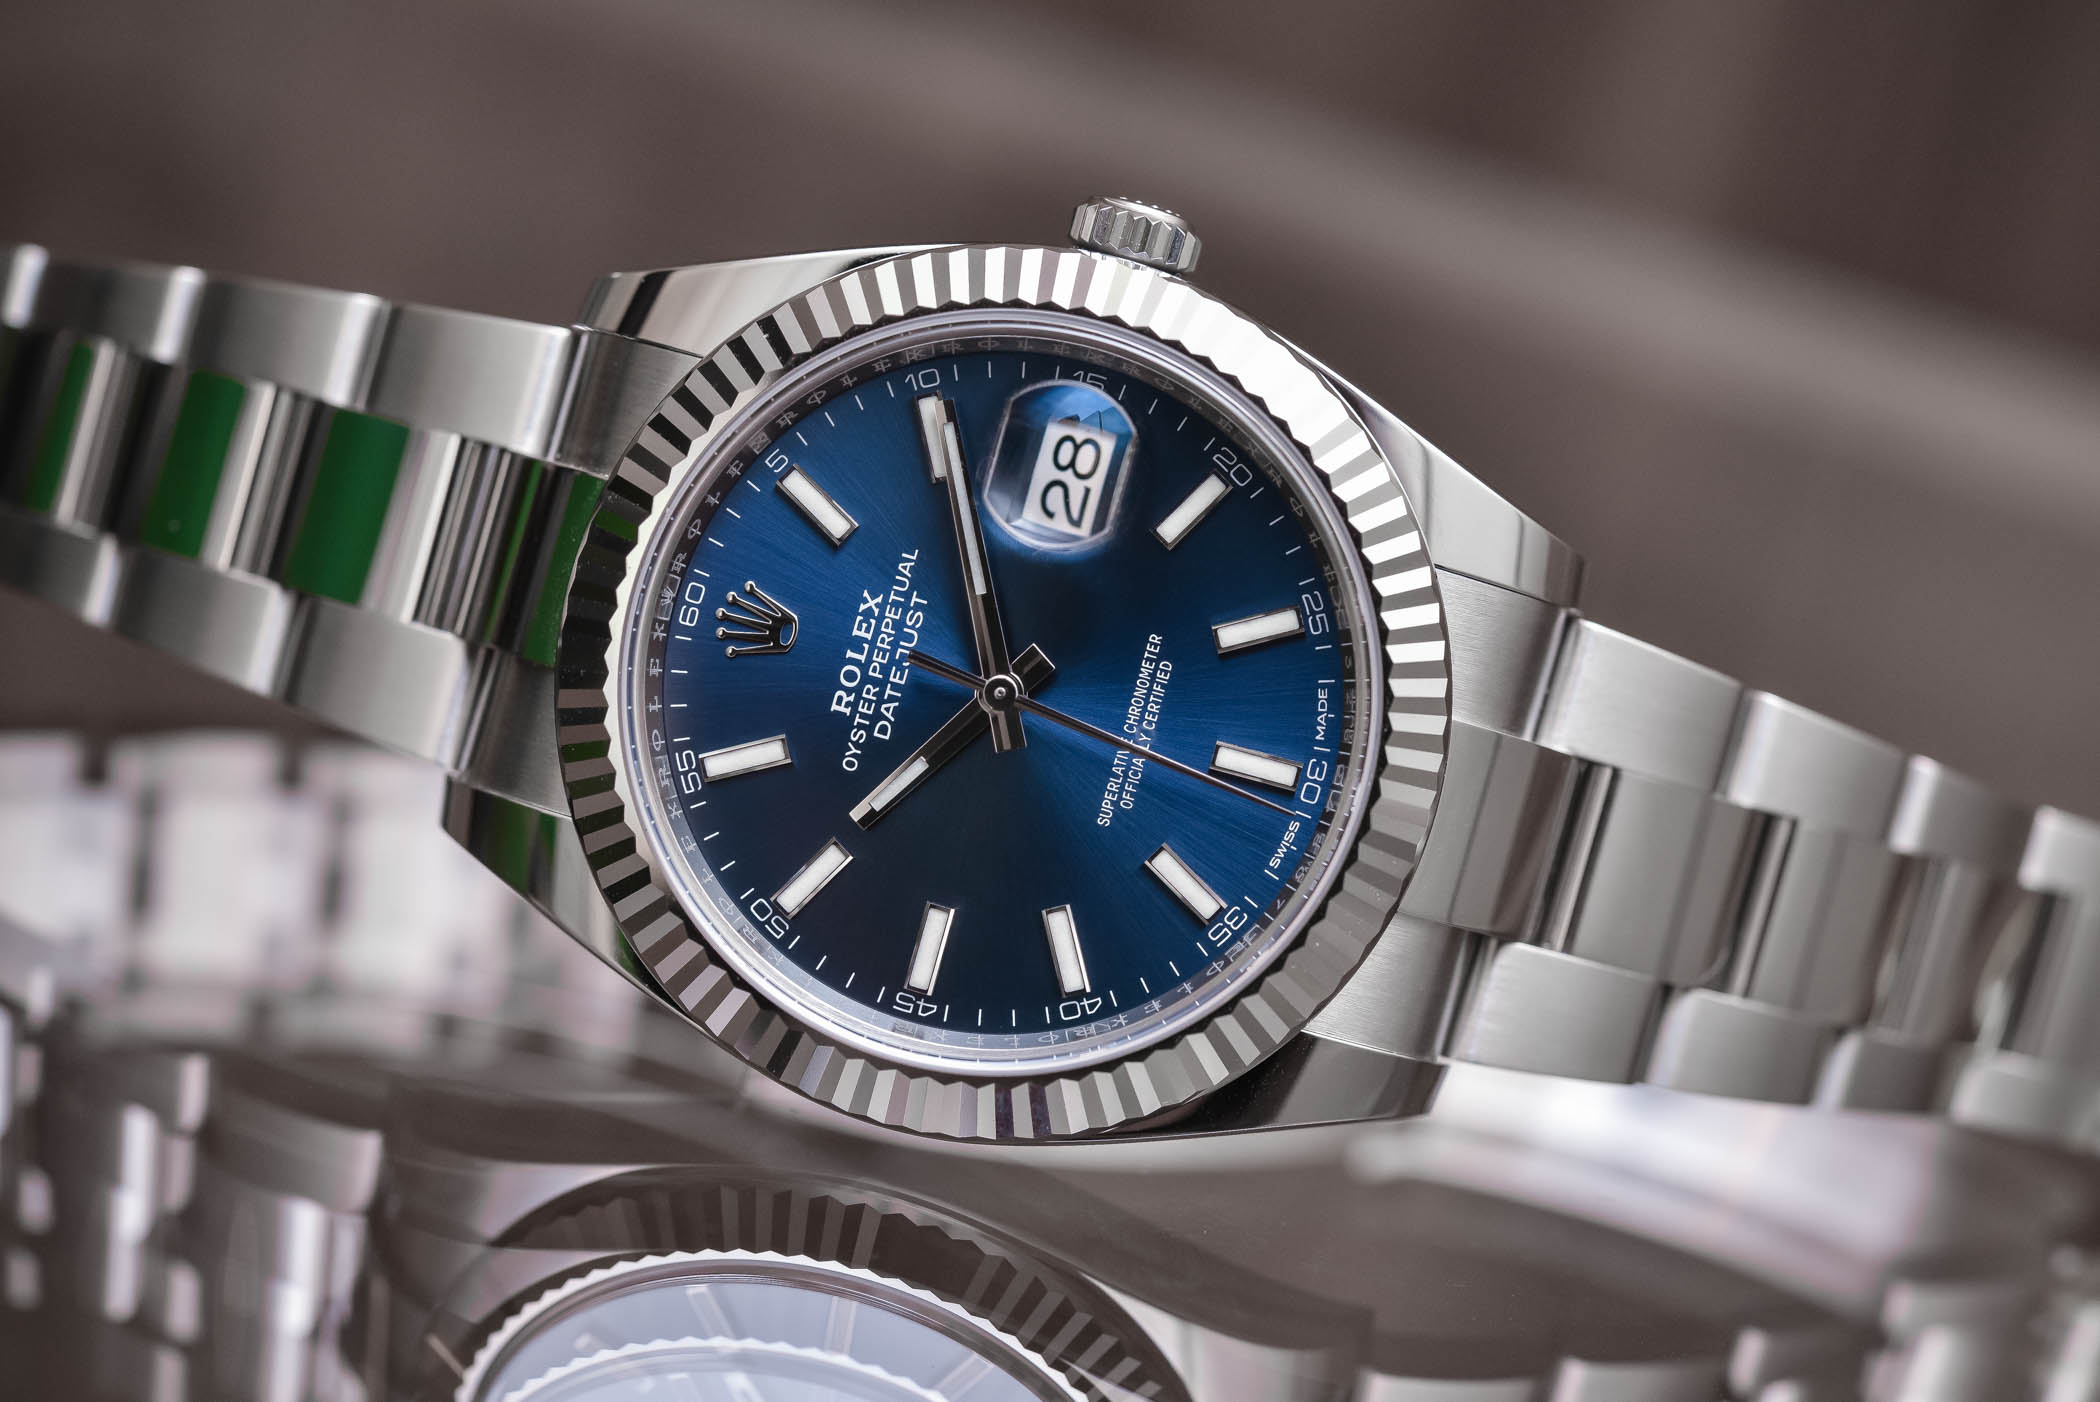 The Rolex Datejust 41 in Steel (a.k.a. 